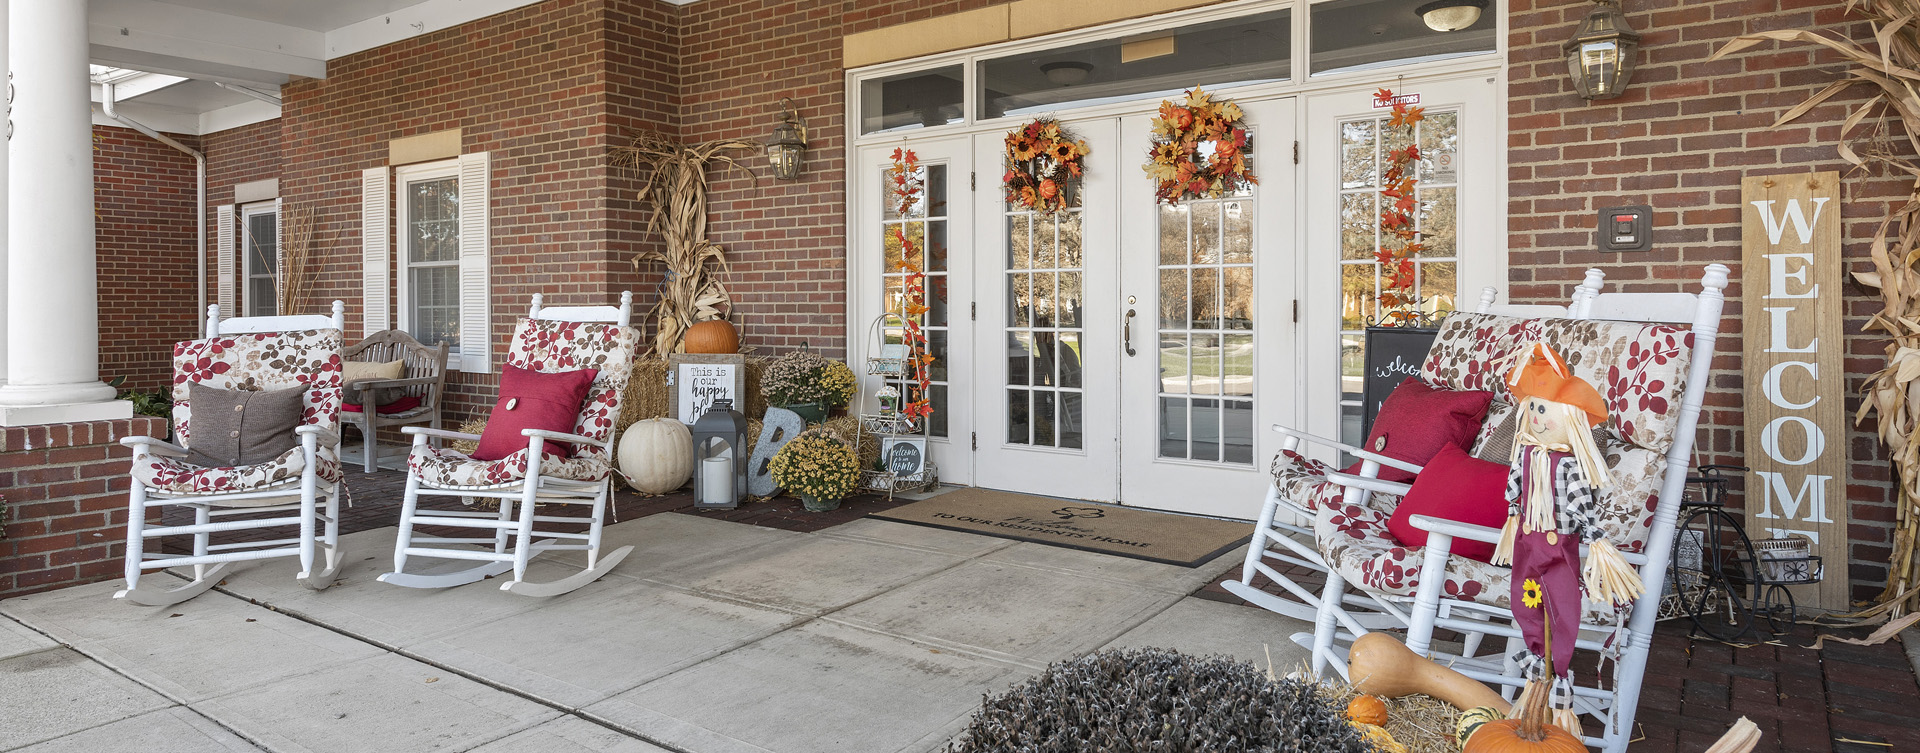 Relax in your favorite chair on the porch at Bickford of Worthington